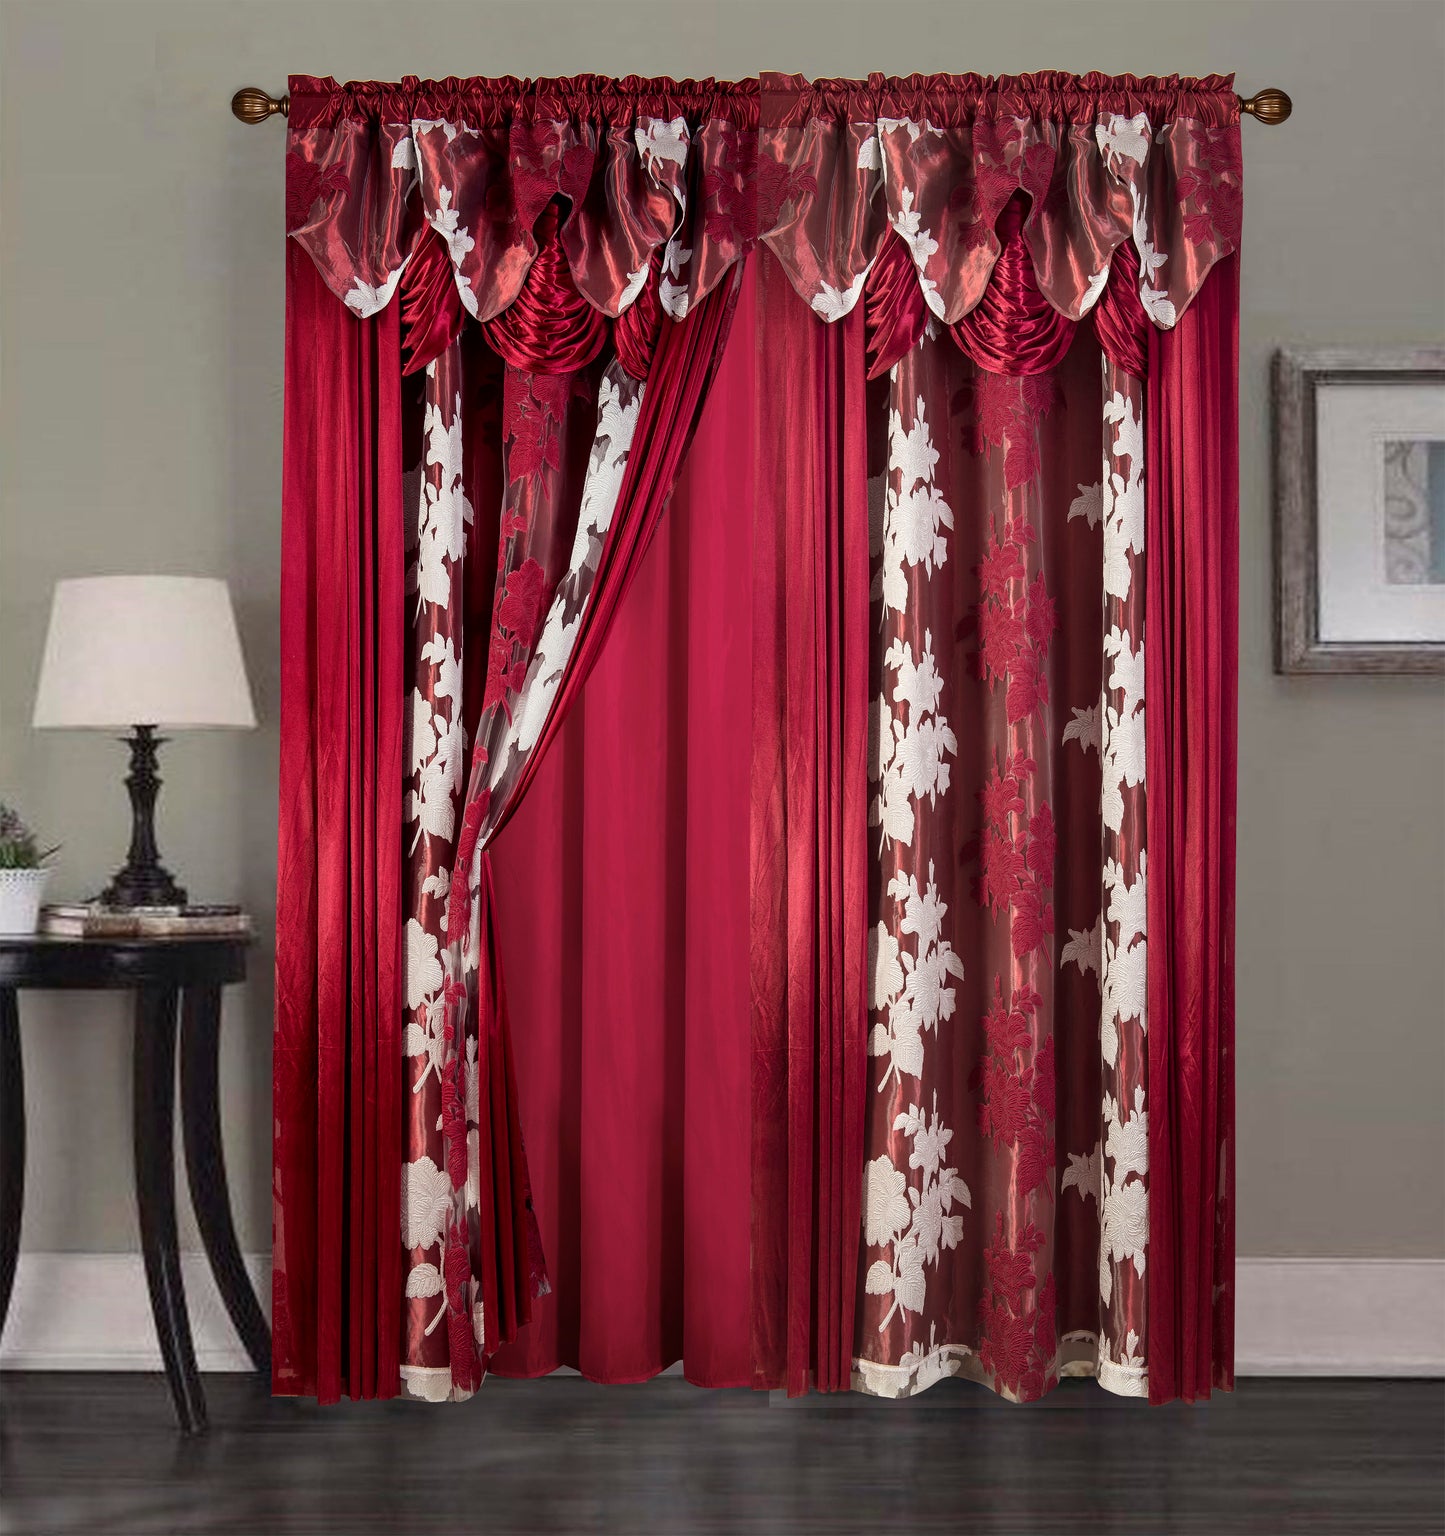 2PC CURTAIN SET W/ ATTACHED VALANCE & BACKING - Ellie